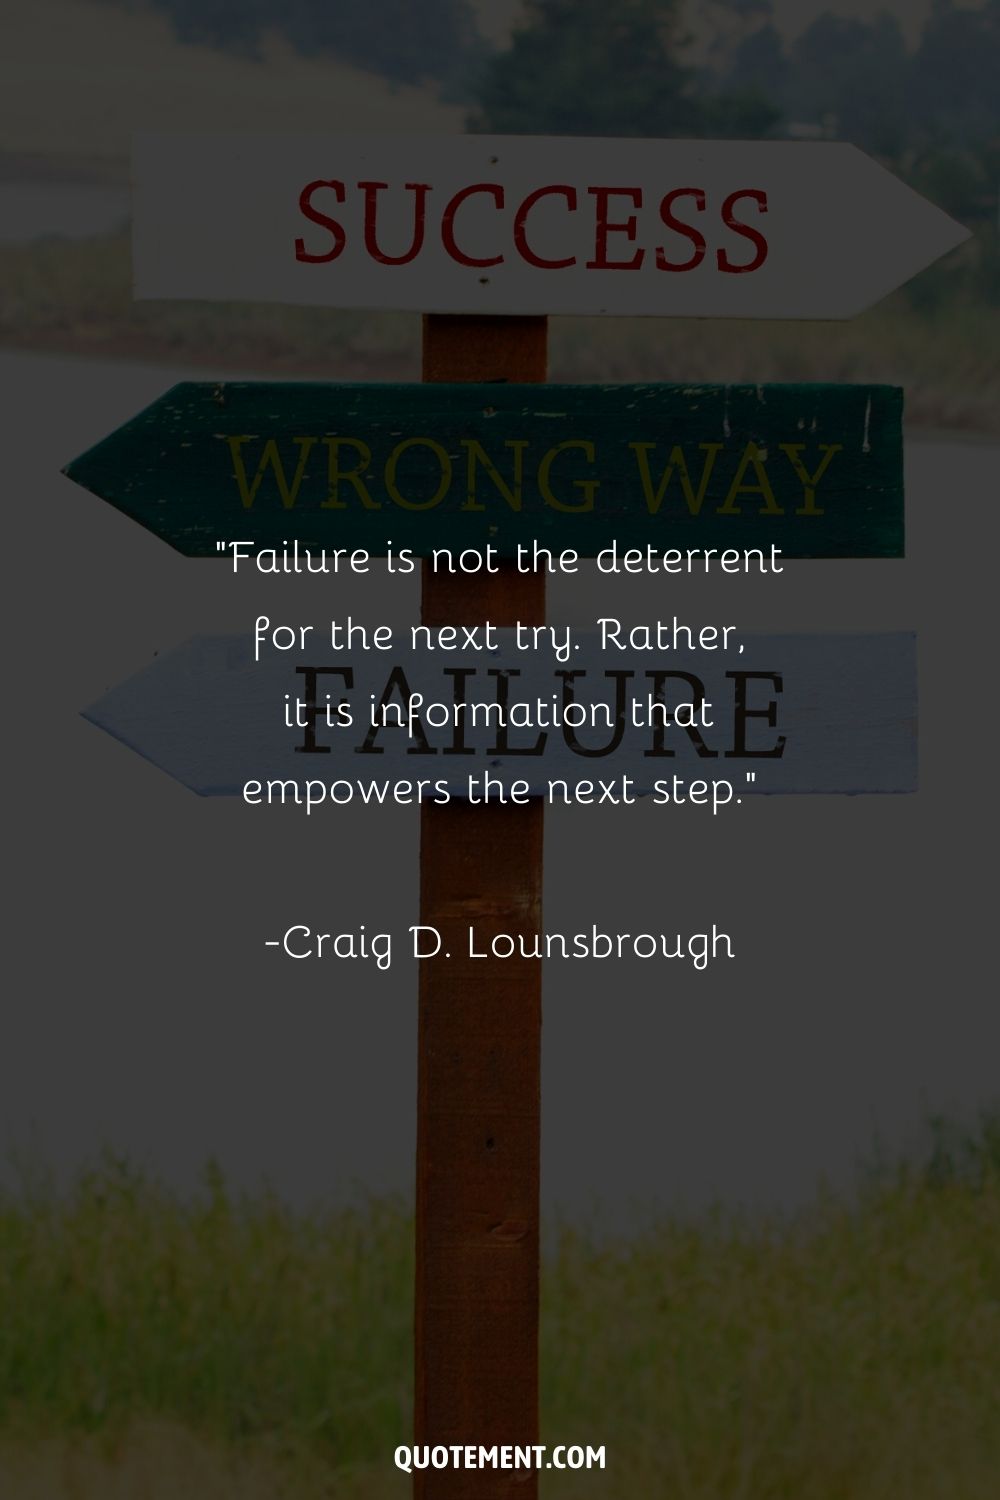 “Failure is not the deterrent for the next try. Rather, it is information that empowers the next step.” ― Craig D. Lounsbrough